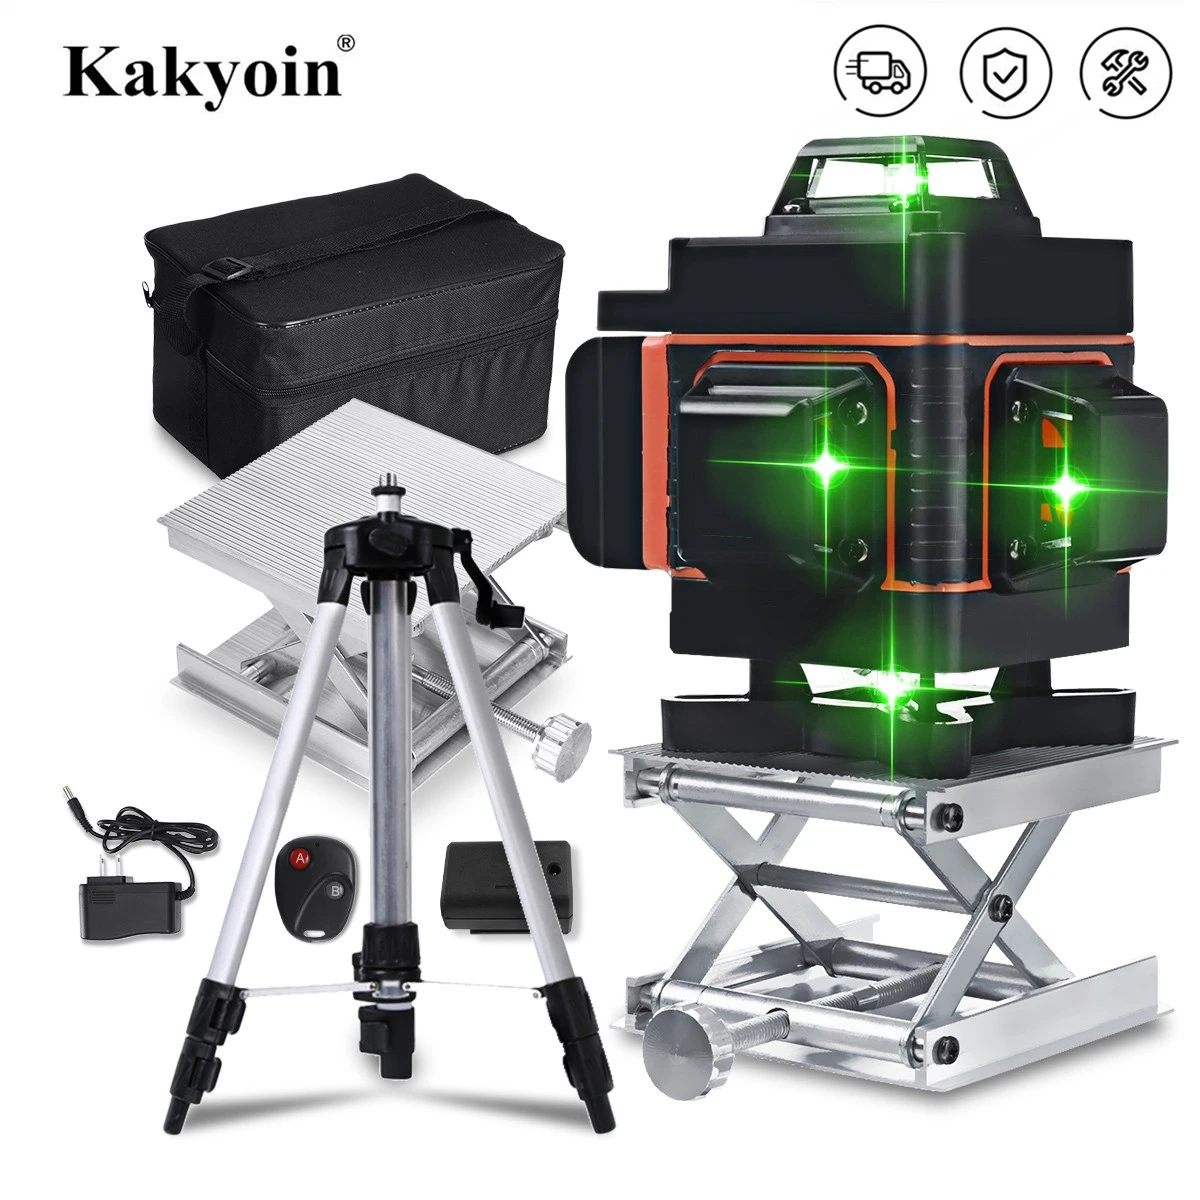 

4D 16 Lines Laser Level Green Light LED Display Auto Self Leveling 360° Rotary Measure Horizontal Vertical Cross Remote Control